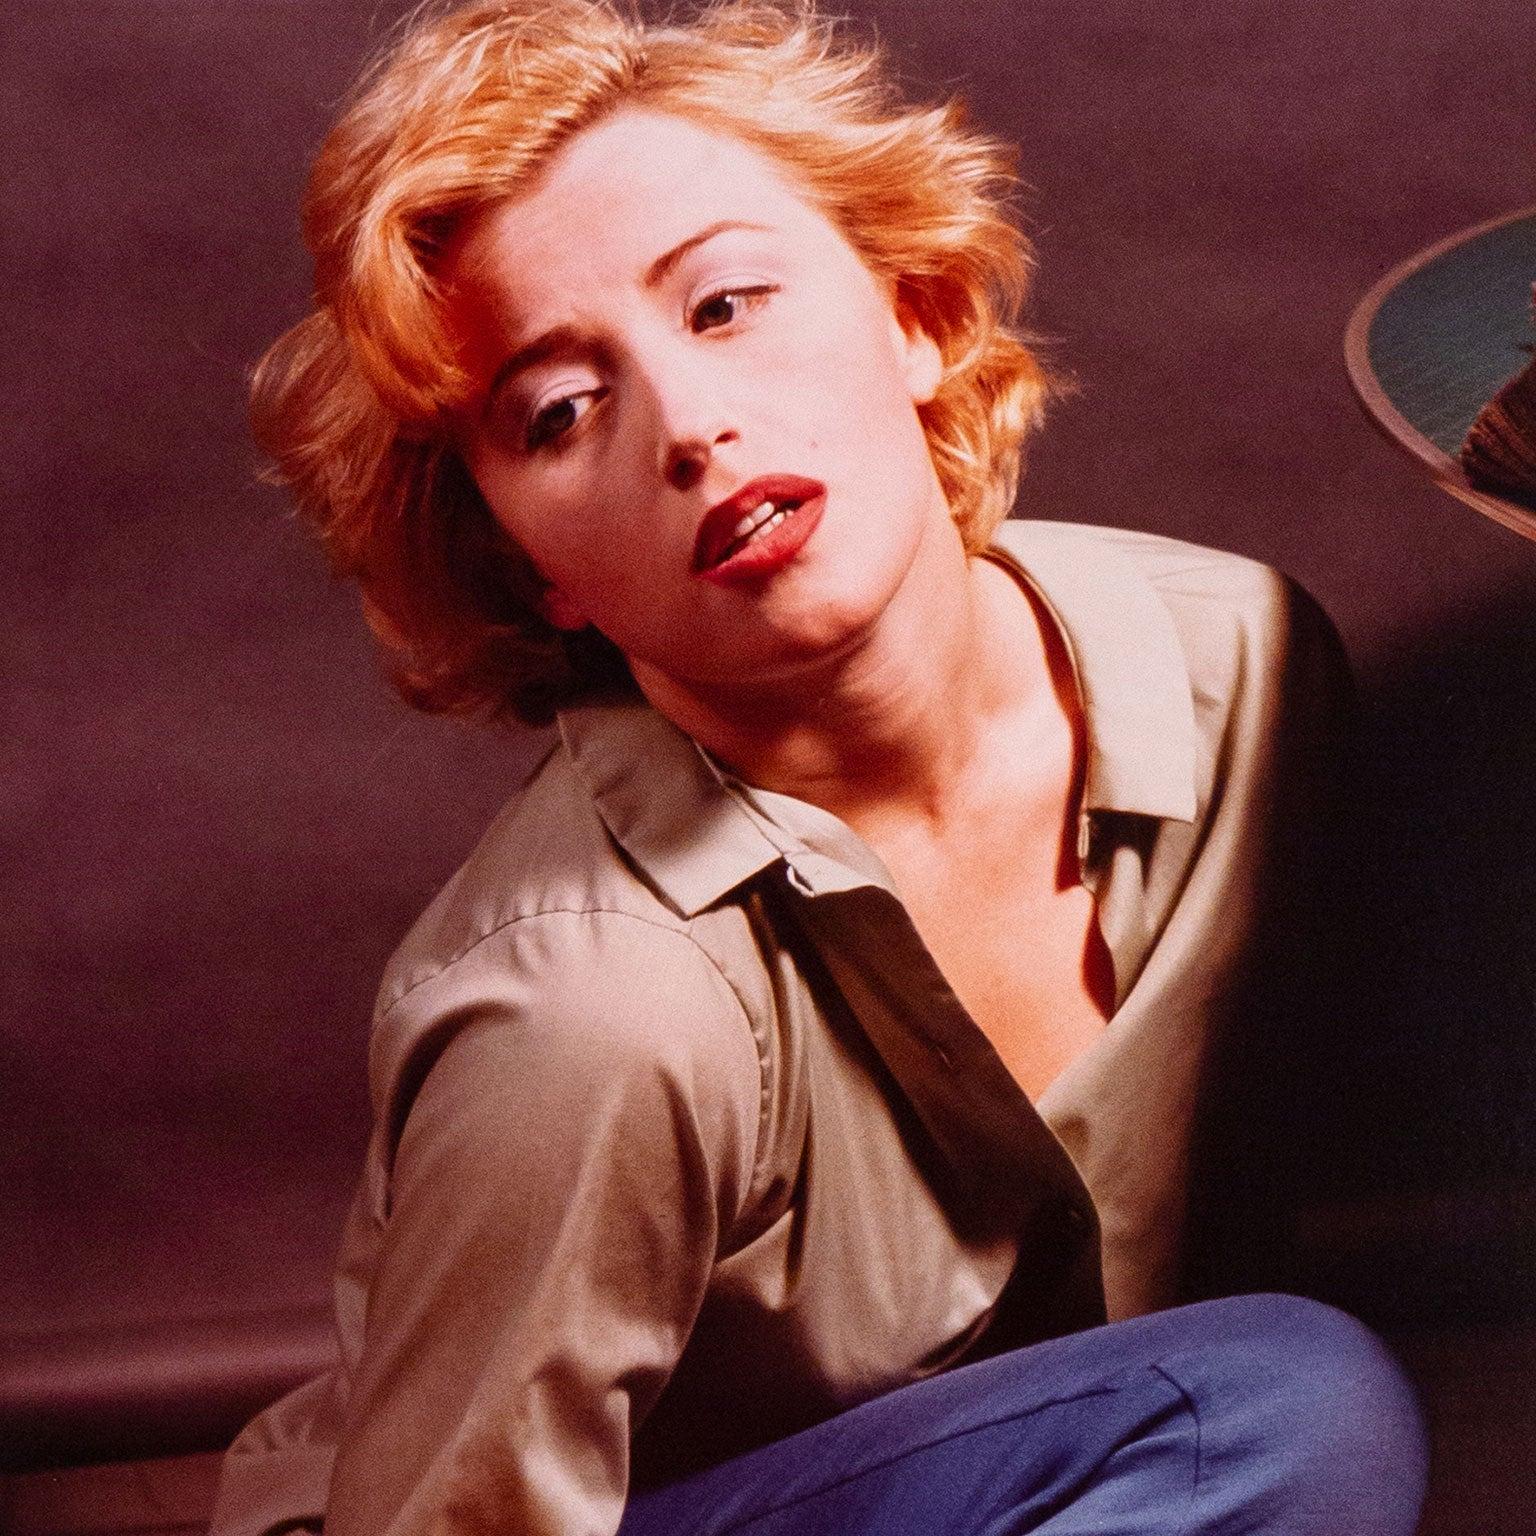 Untitled (Marilyn Monroe) - Conceptual Photograph by Cindy Sherman